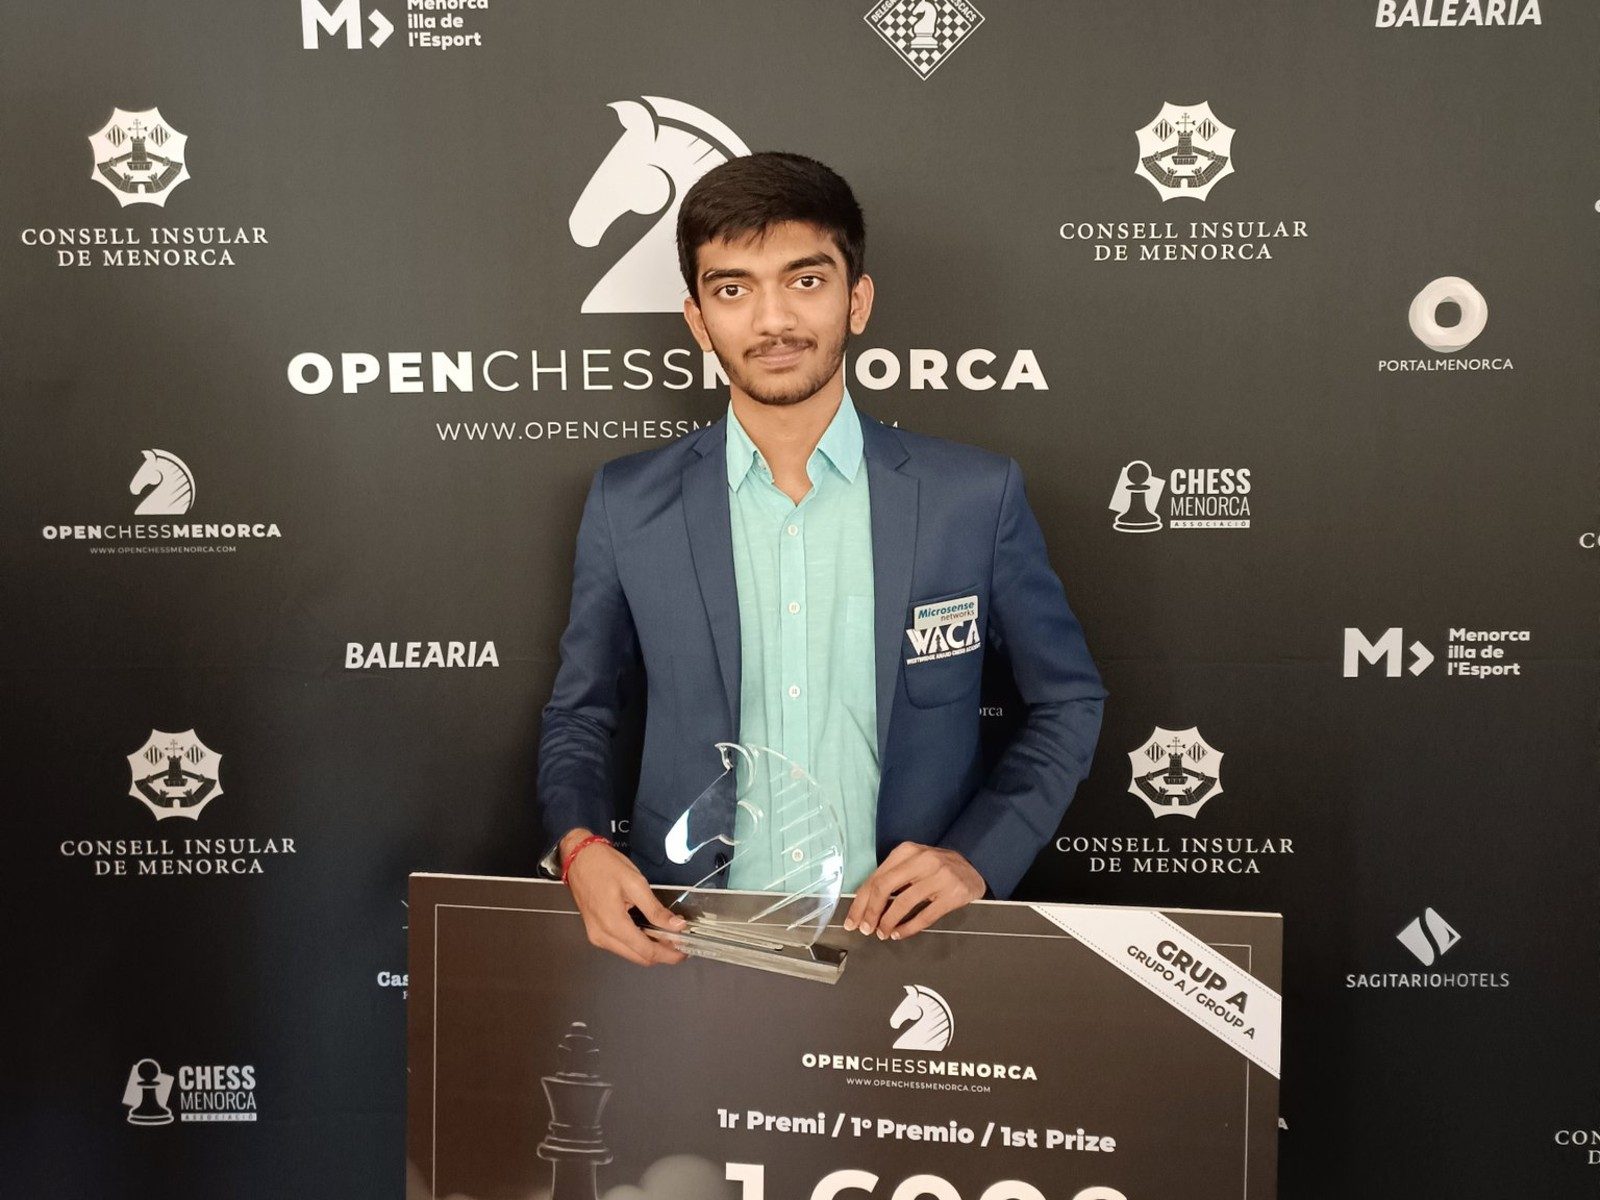 Dommaraju Gukesh reaches the 11th spot in the live World rankings